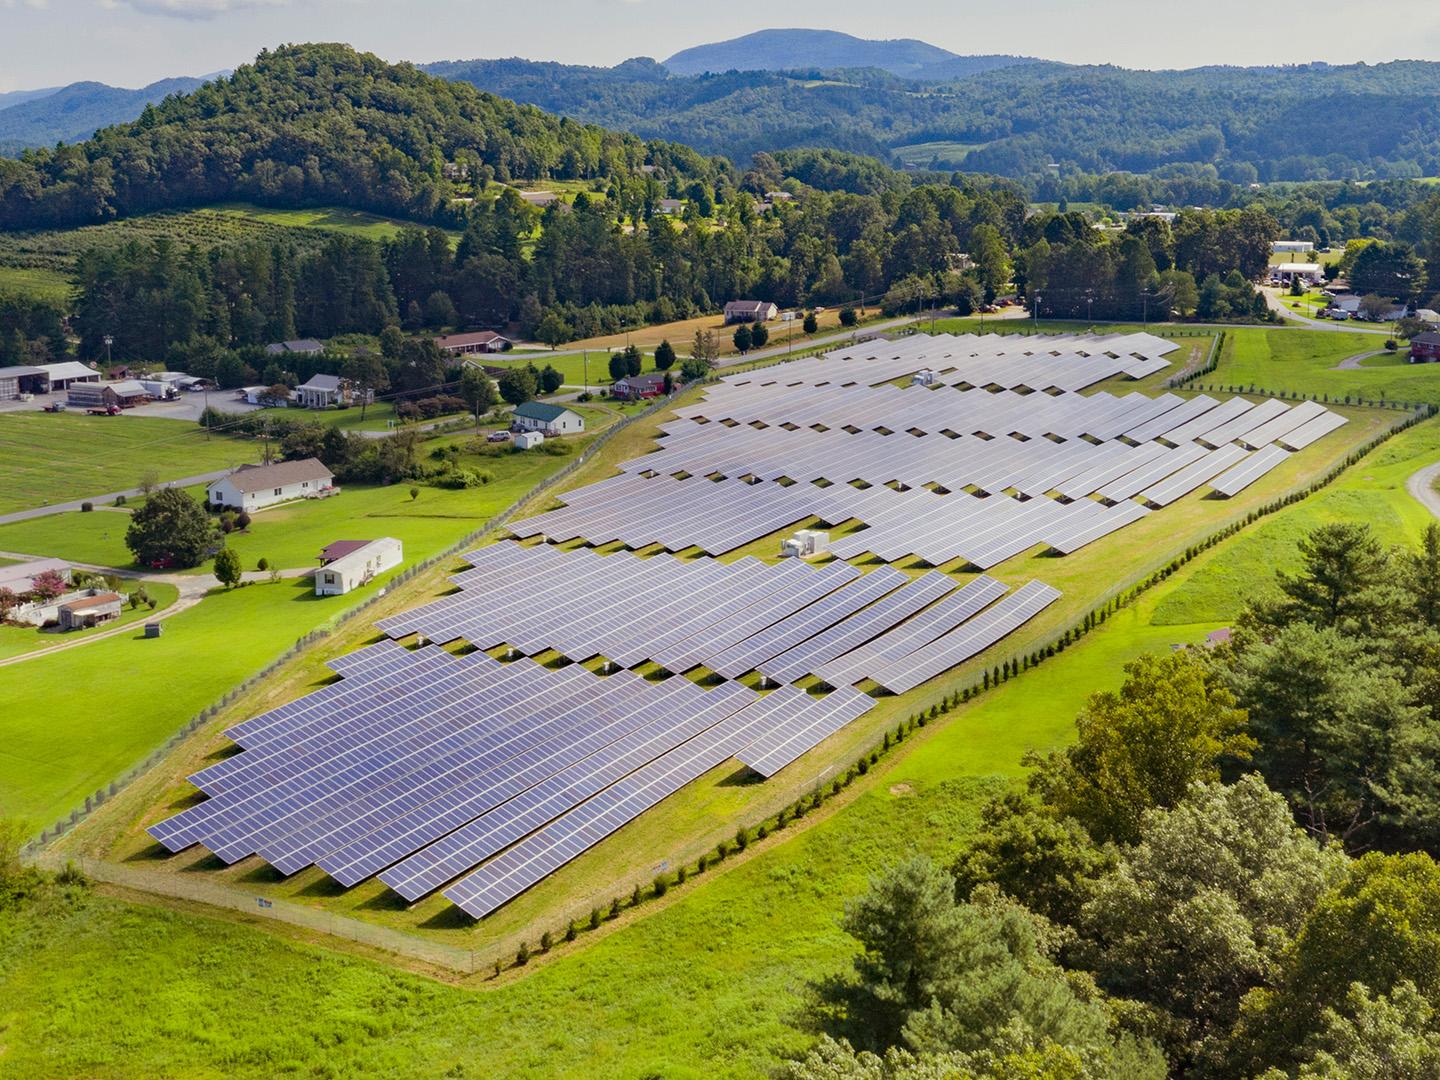 A solar farm built by Cypress Creek Renewables in Henderson, North Carolina. The solar industry’s trade group, SEIA, estimates that 23,000 jobs this year will be lost or not created due to recent tariffs.